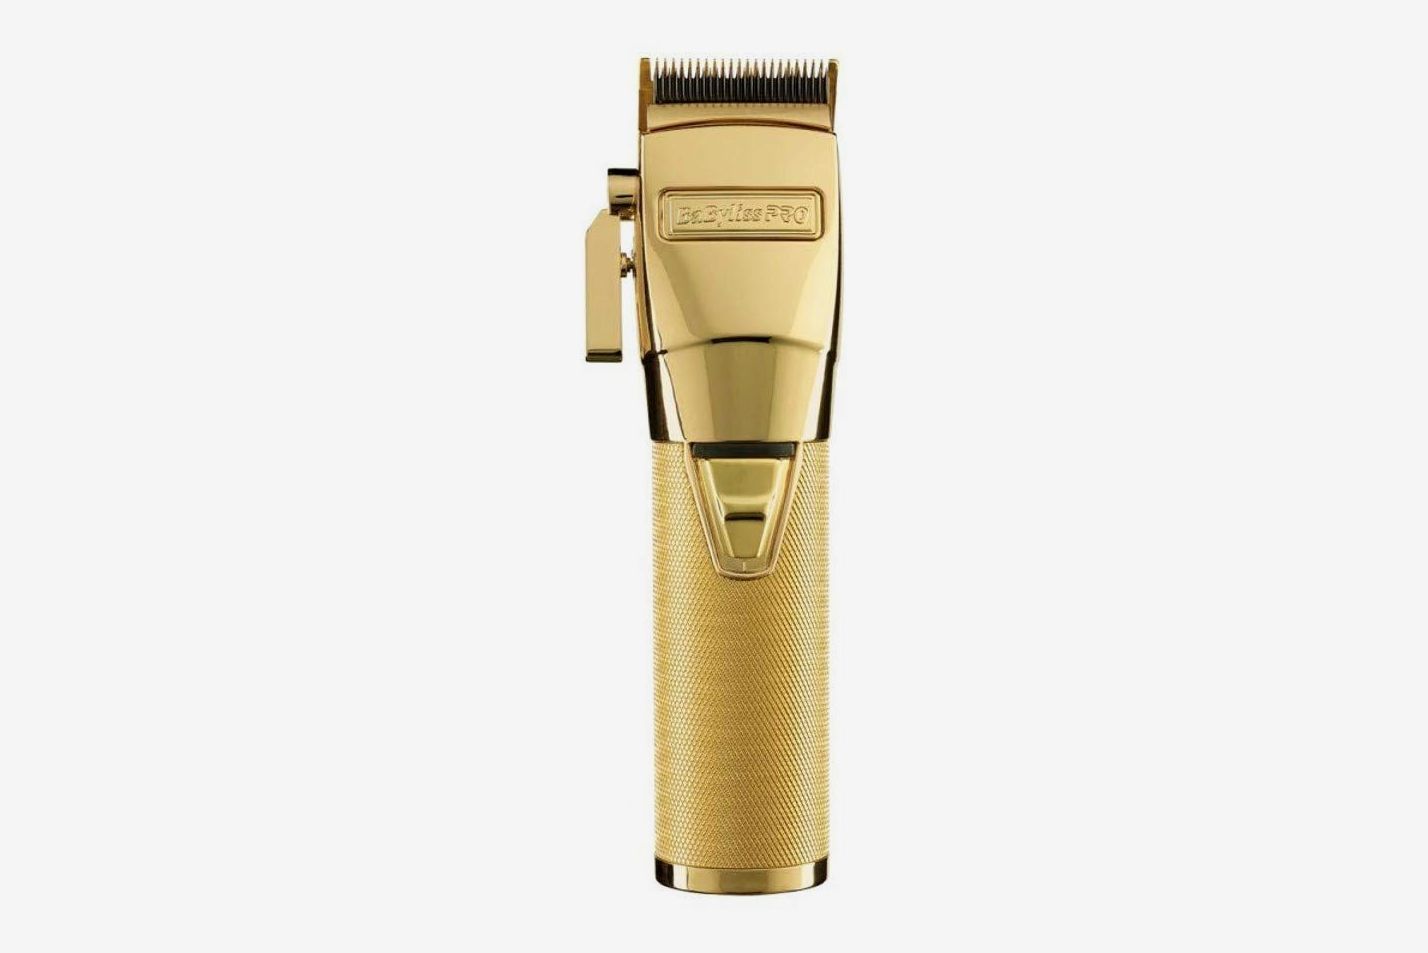 What The Best Beard Trimmers? The Strategist